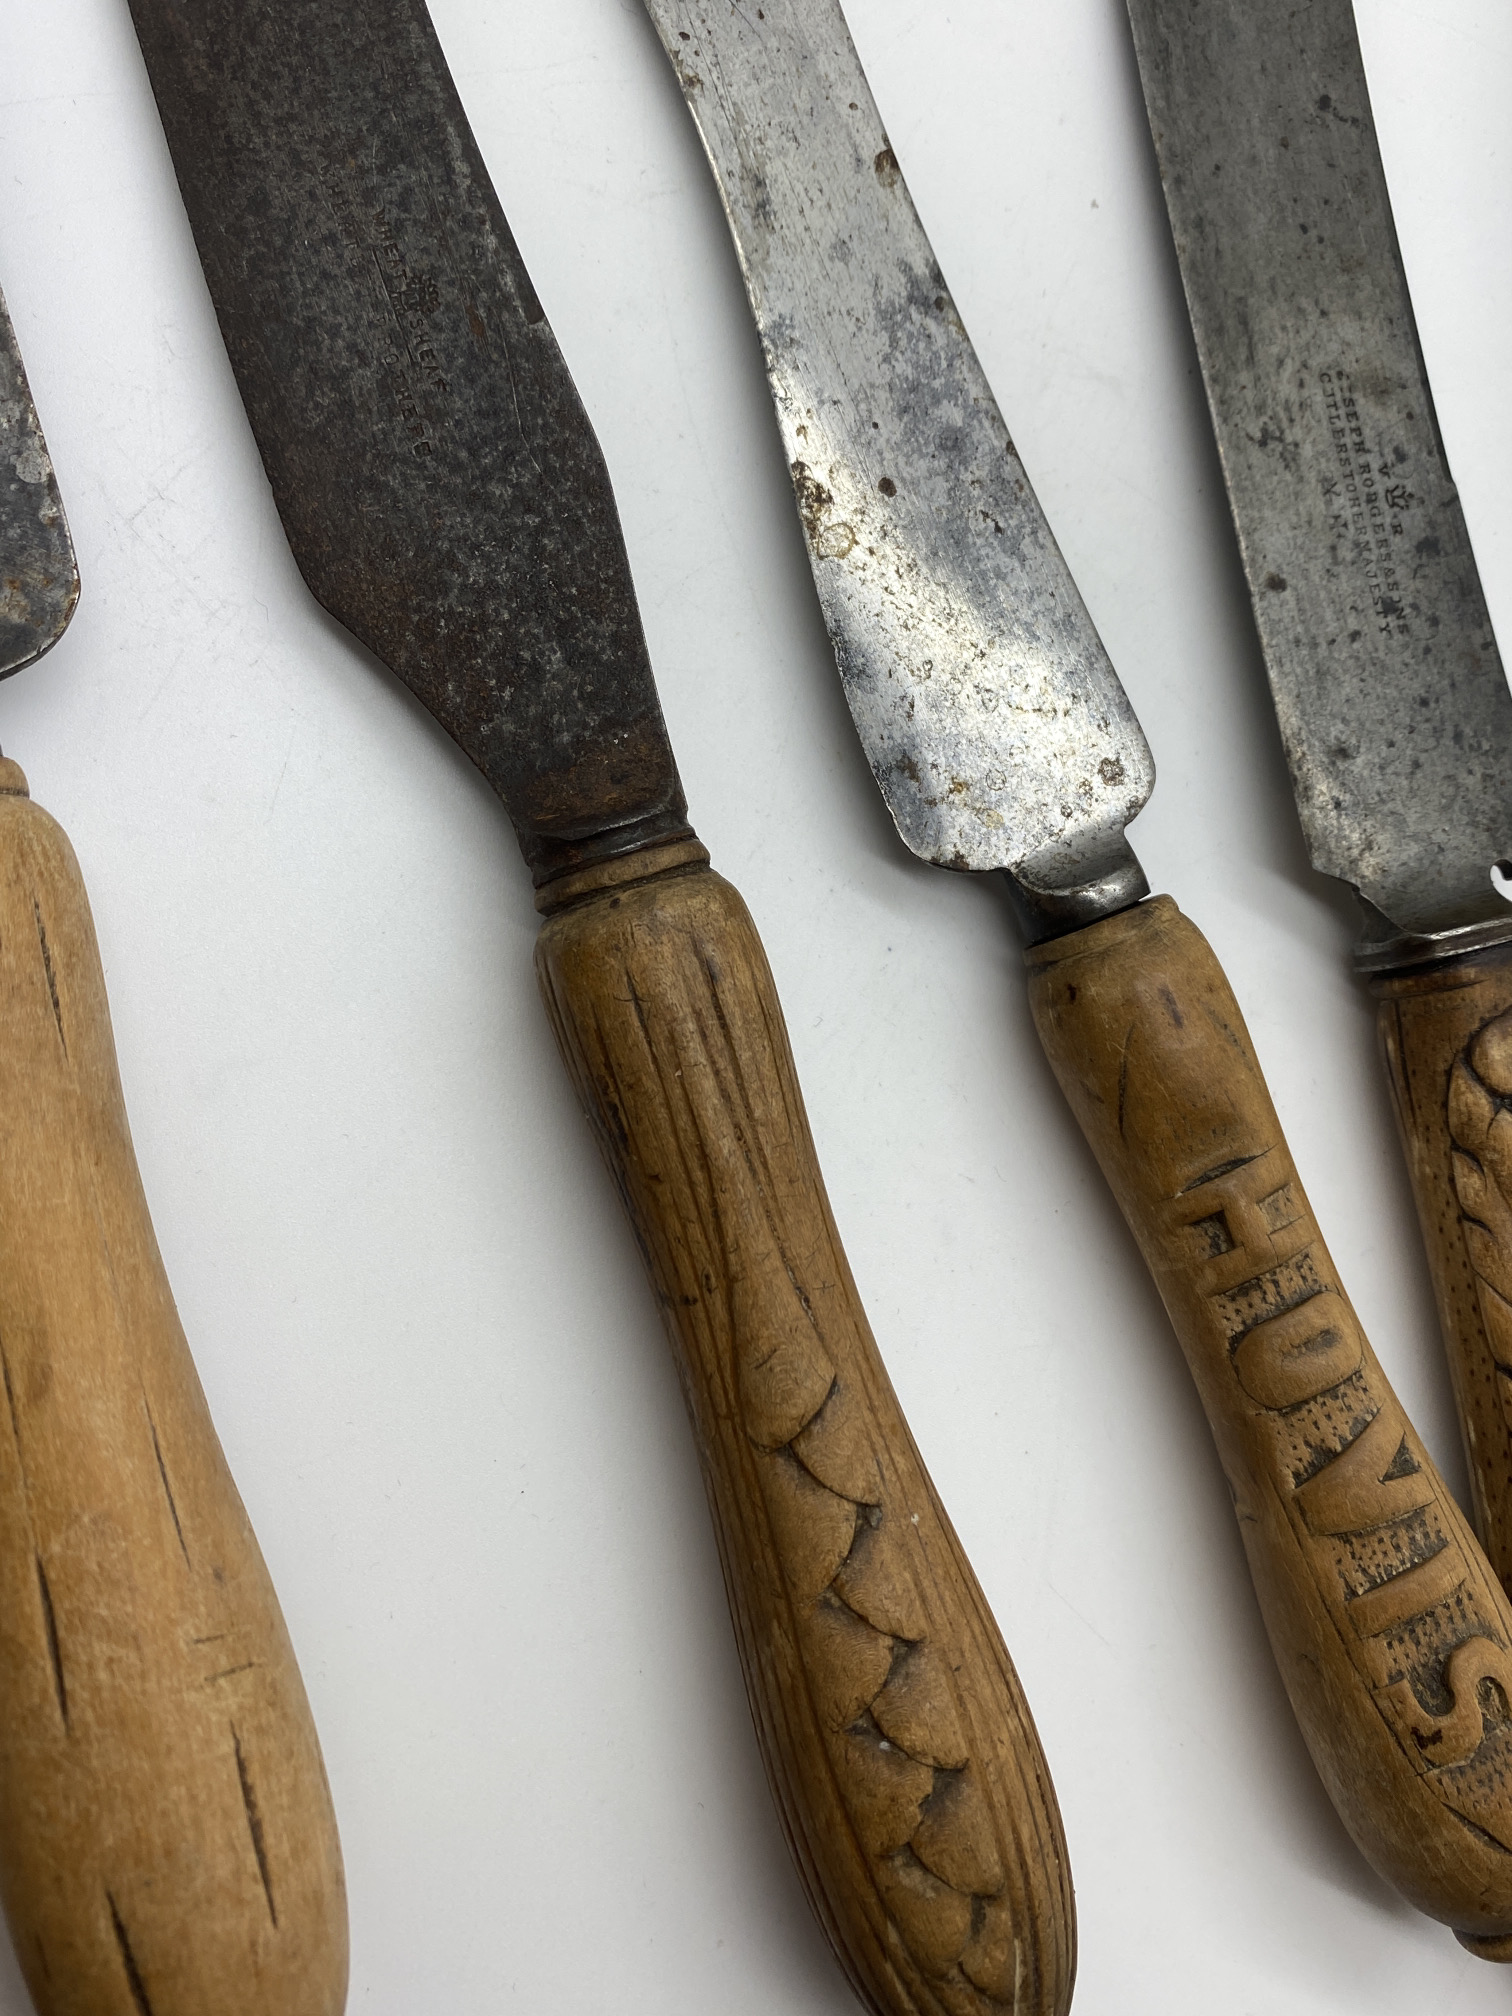 5 x ANTIQUE 1930's BREAD KNIVES INCLUDING HOVIS & BREAD - INC JOSEPH RODGERS - WHEAT SHEAF ETC - Image 10 of 14